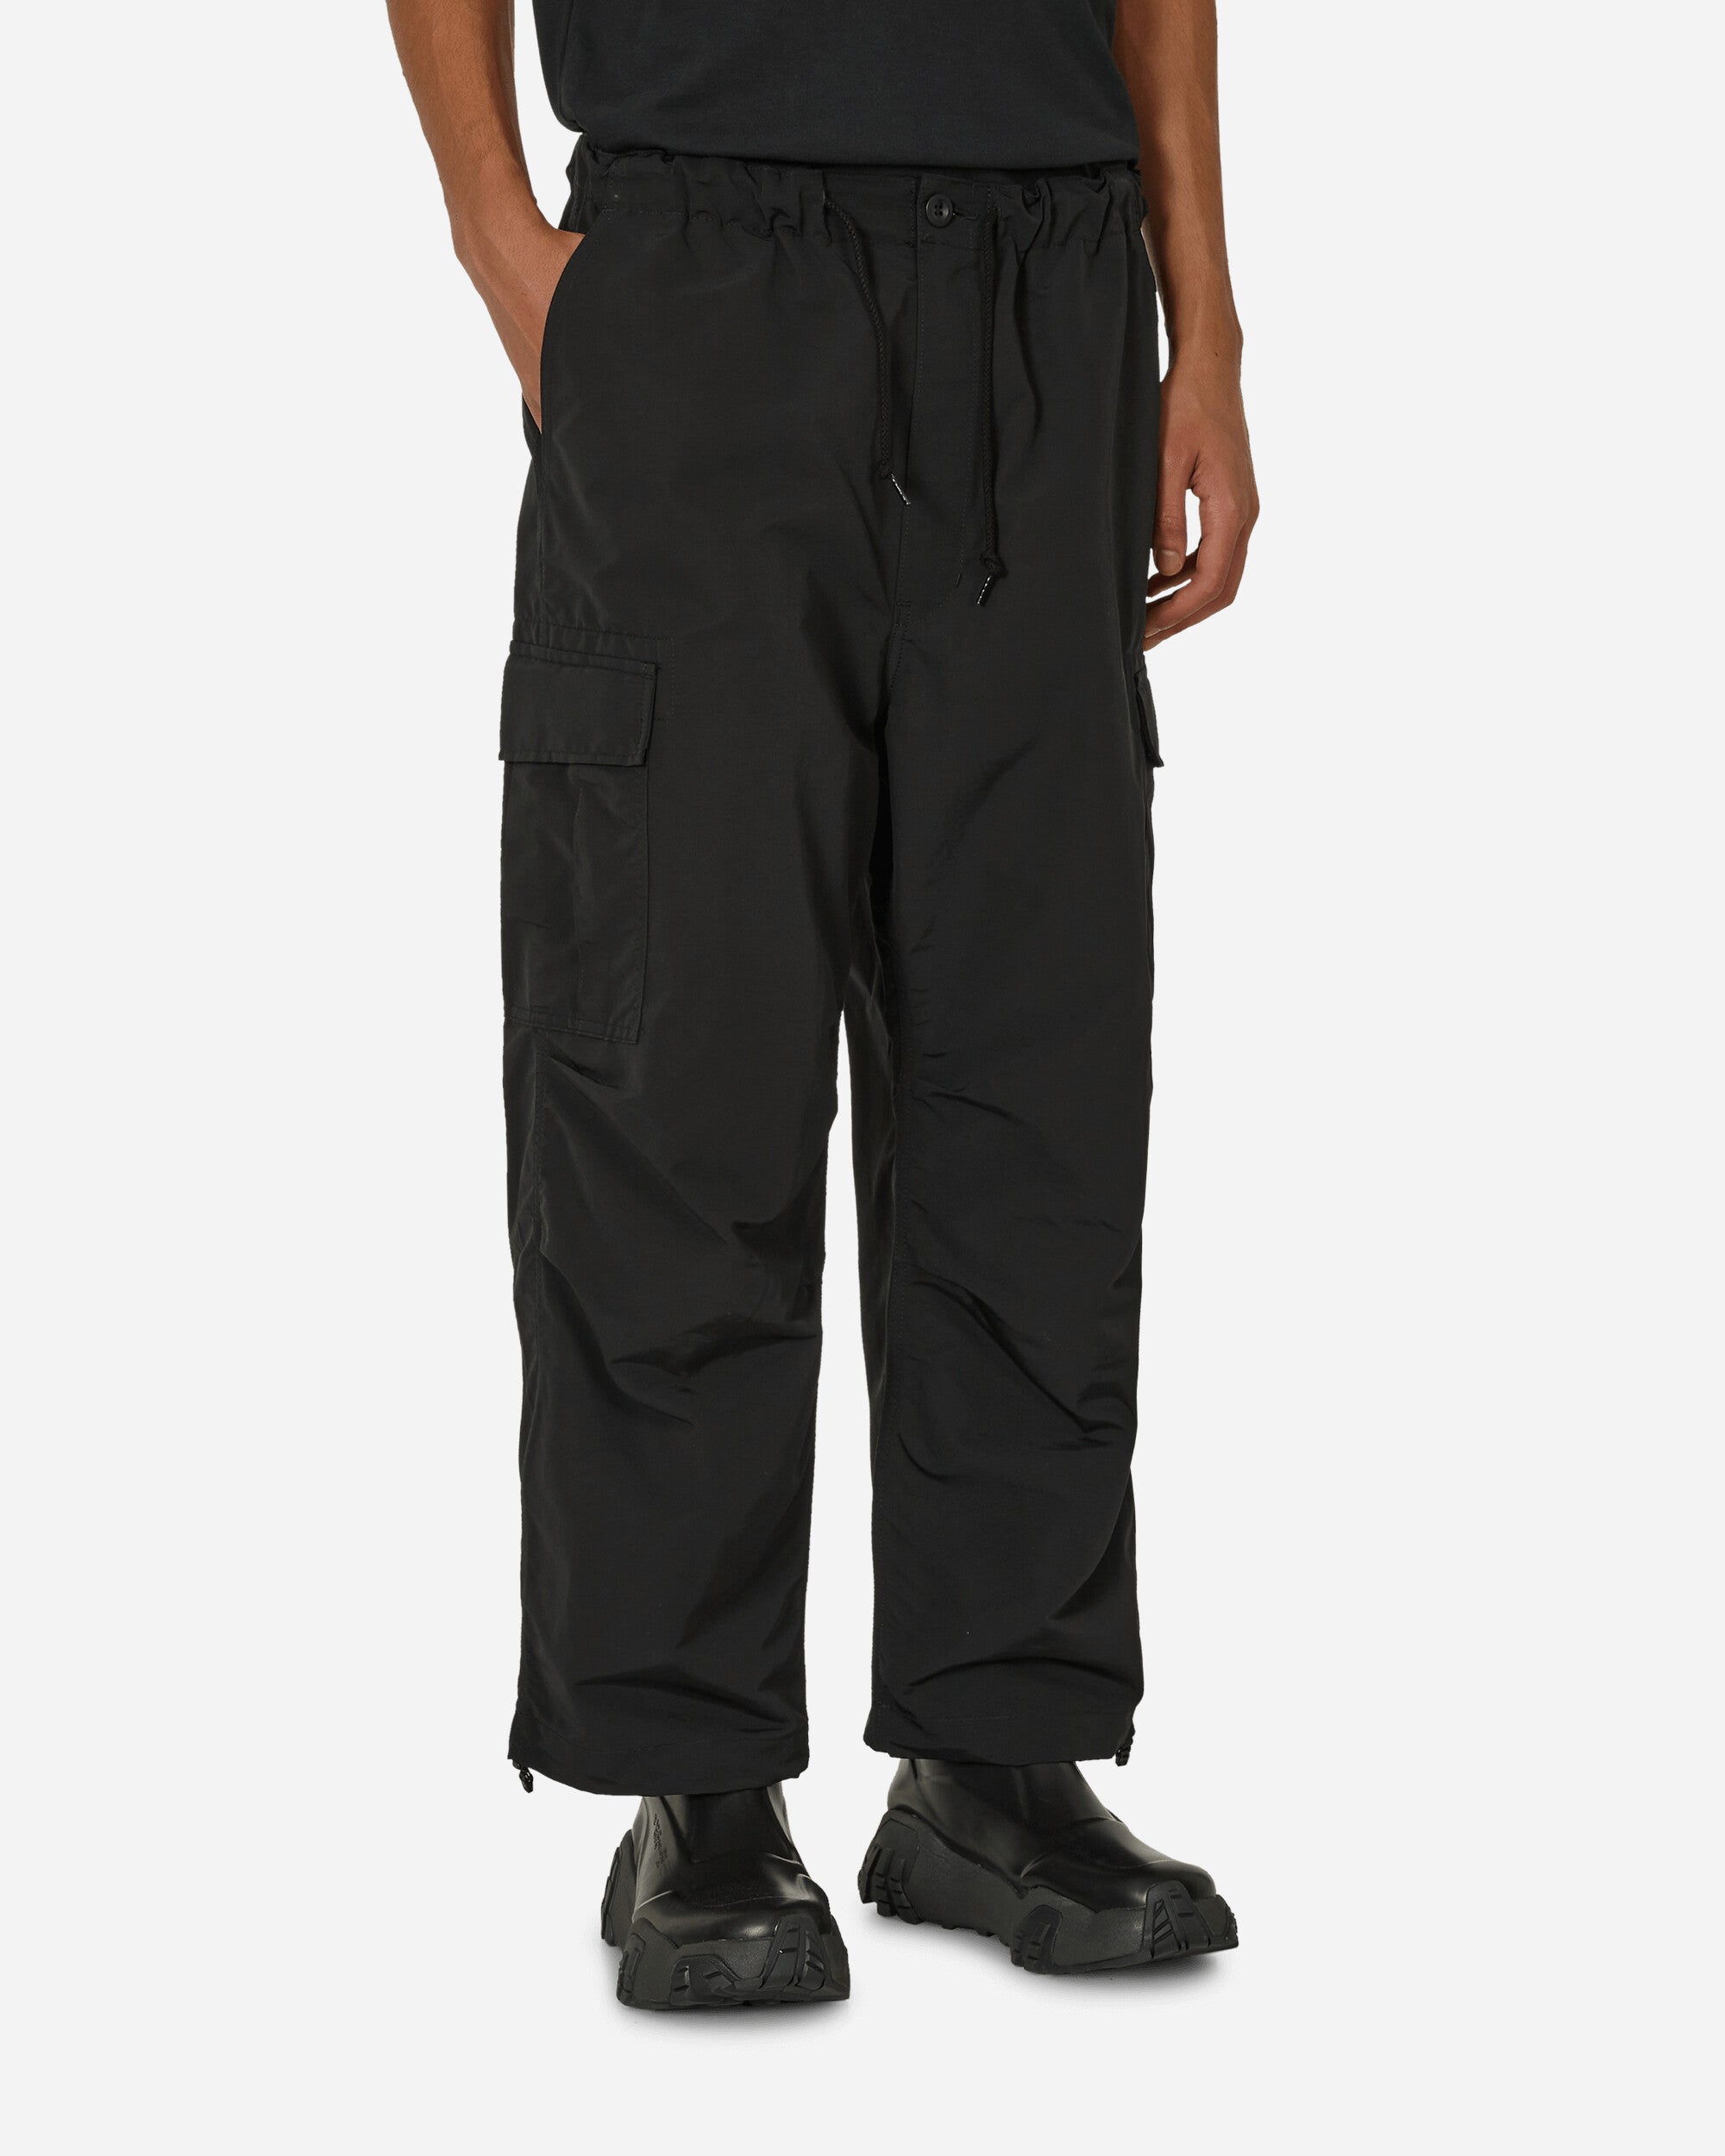 Free Country Men's Work Pants - Polyester Leggings, Elastic Closure, Medium  Weight, Black, Large Size - Comfortable, Warm, Wind Resistant - Active Wear  in the Pants department at Lowes.com